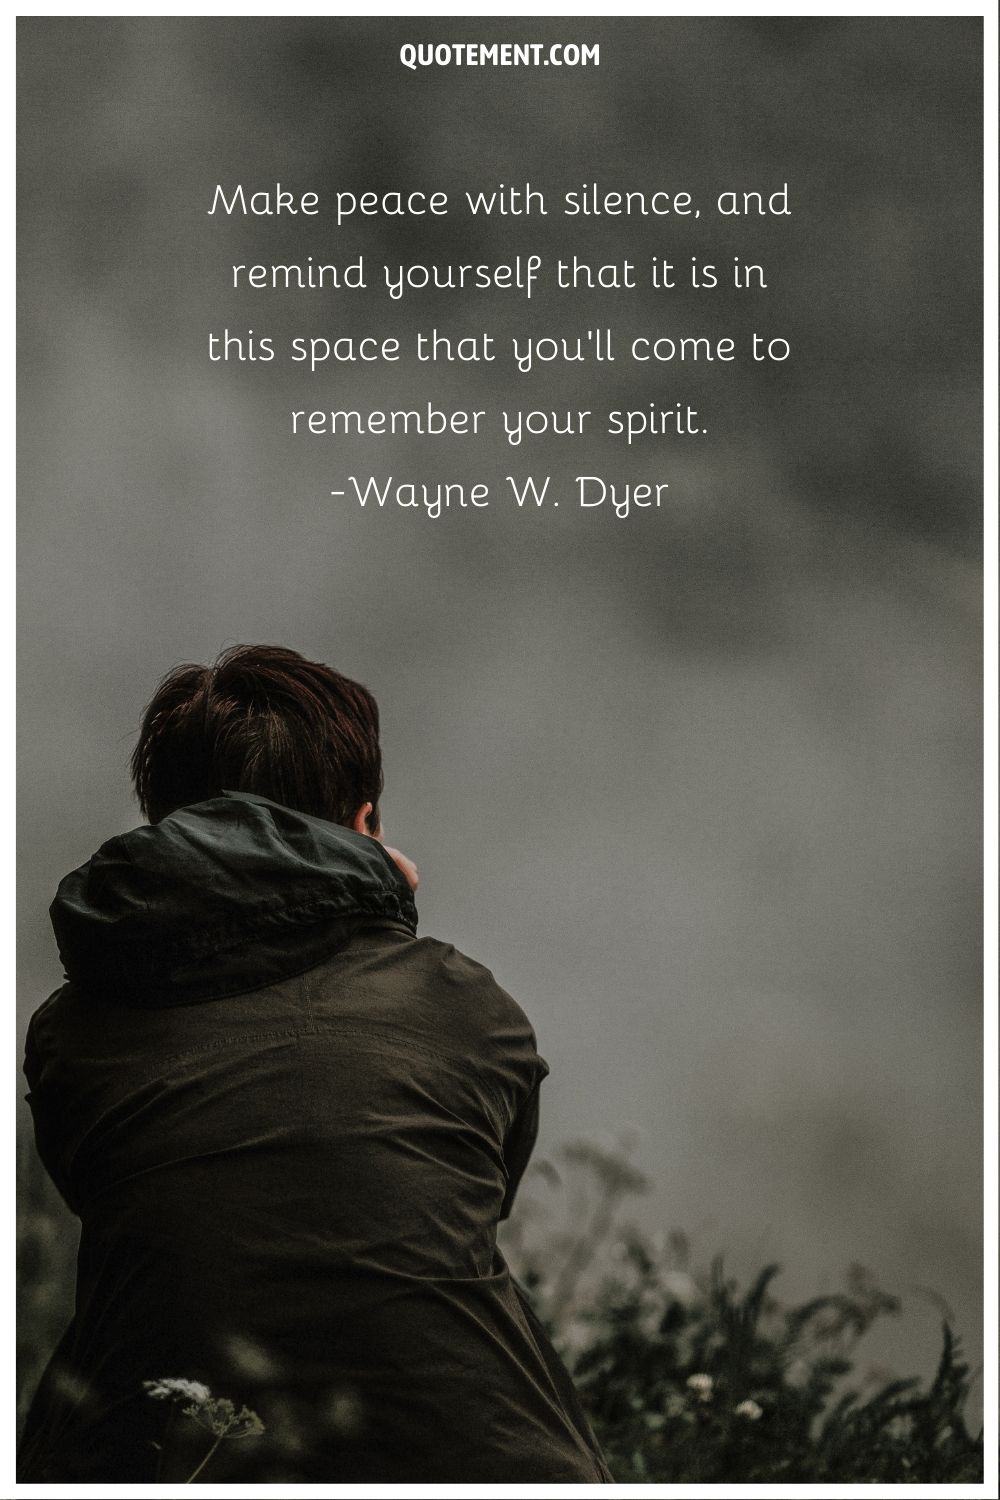 “Make peace with silence, and remind yourself that it is in this space that you’ll come to remember your spirit.” – Wayne W. Dyer